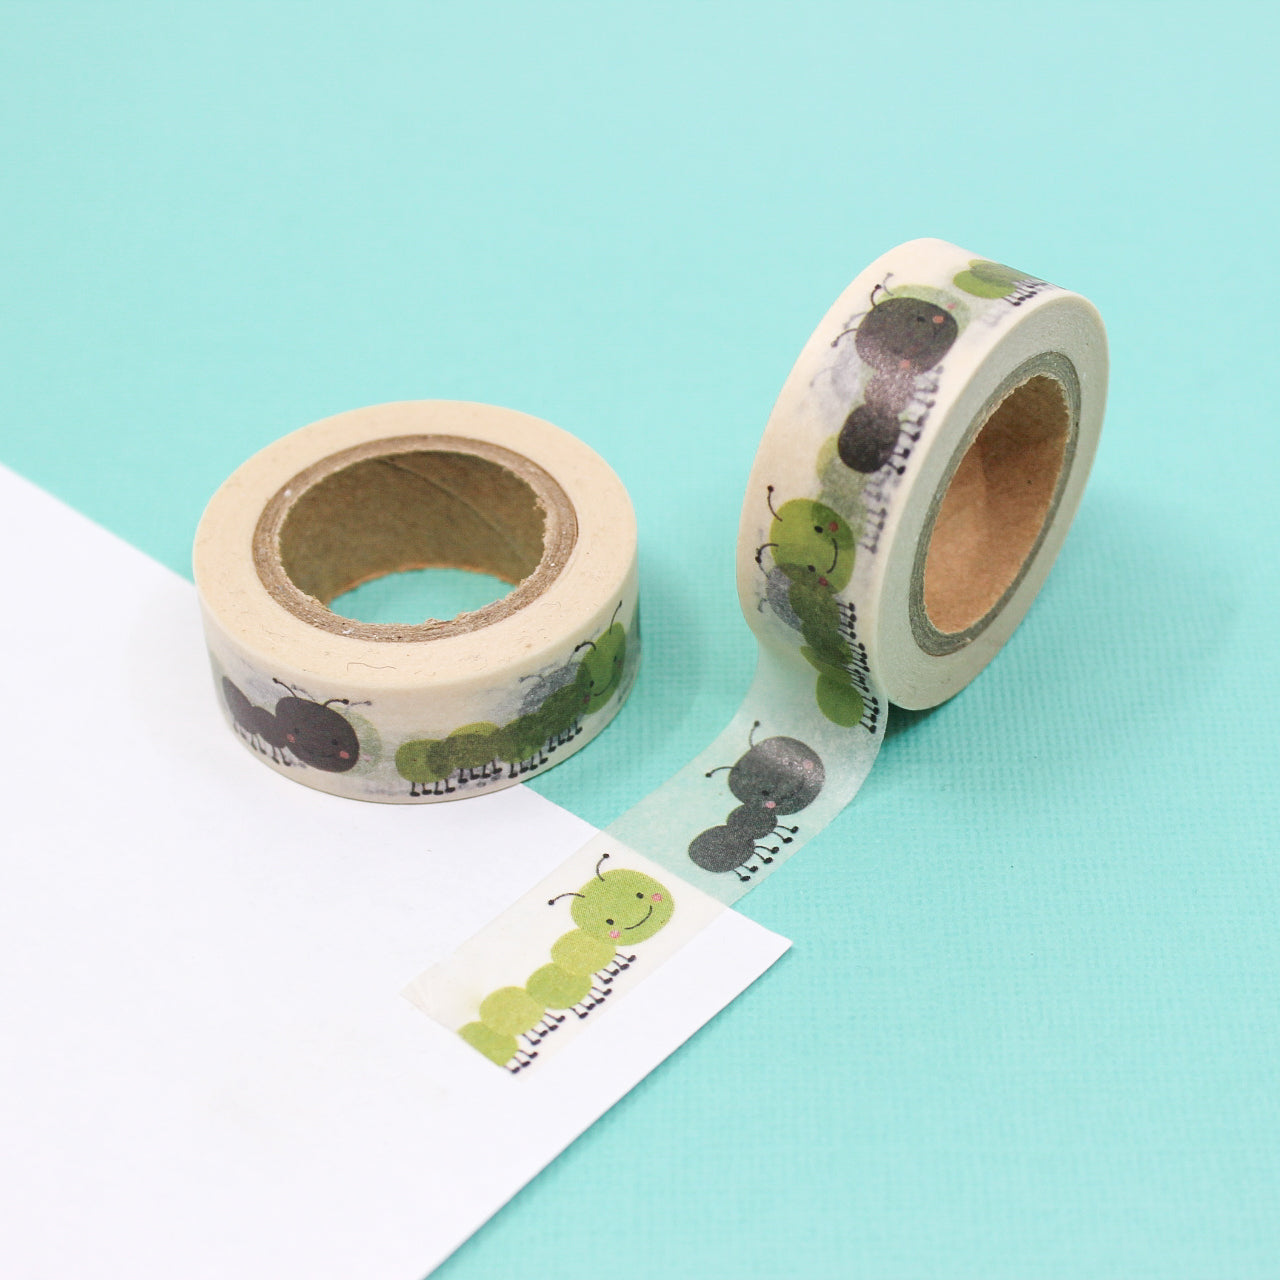 This adorable Insect tape is bright and colorful. It is perfect for a plant watering or gardening habit tracker or super fun kid-friendly tape for a science project or to use with lessons for The Very Hungry Caterpillar.  This tape is sold at BBB Supplies Craft Shop.